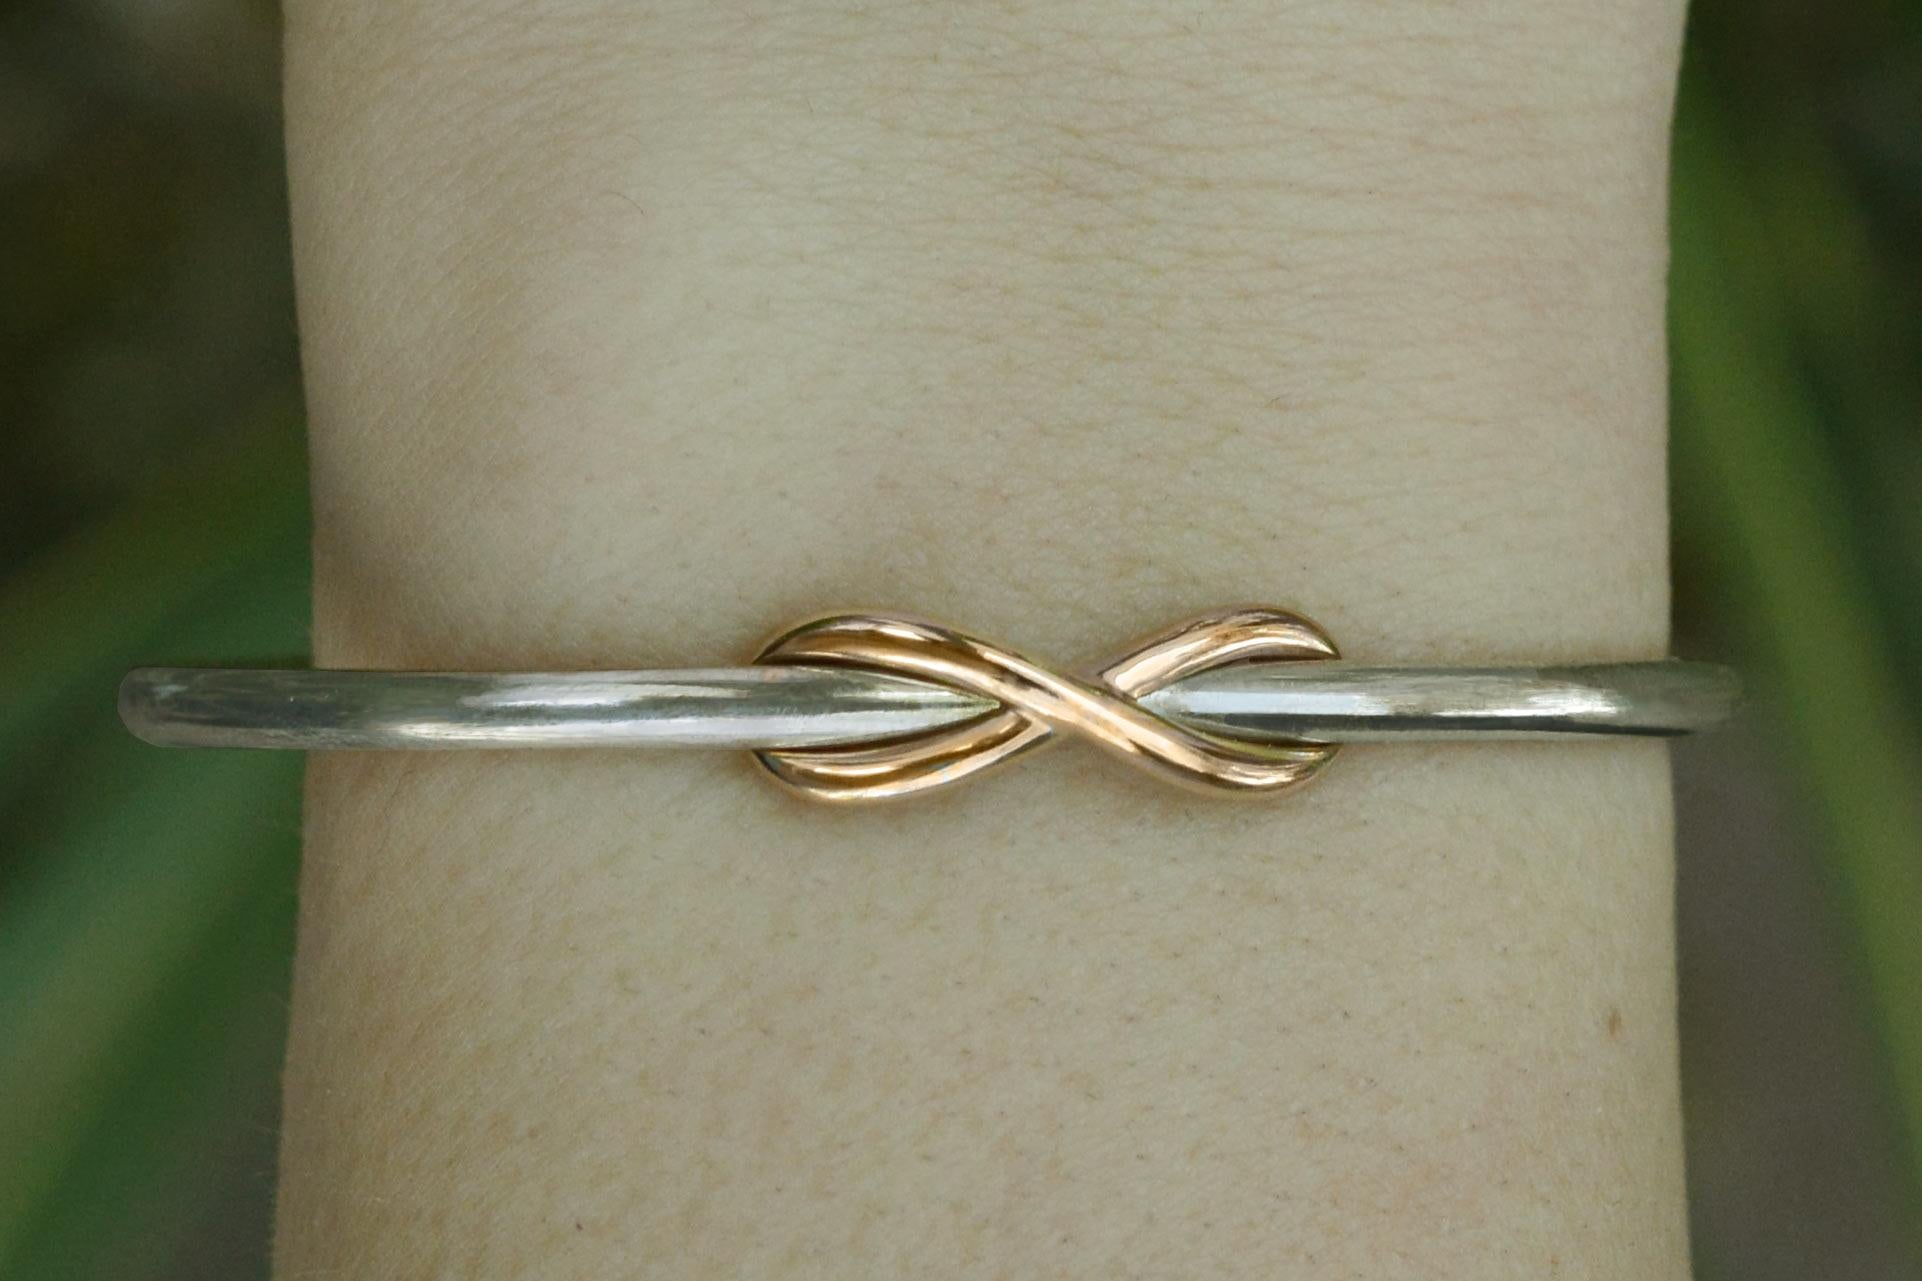 This Tiffany & Co. Infinity bangle bracelet features a sterling silver cuff with a contrasting, intertwined 18k rose gold infinity woven through it. An affordable luxury, this retired, two tone design is no longer available with rose gold. See our